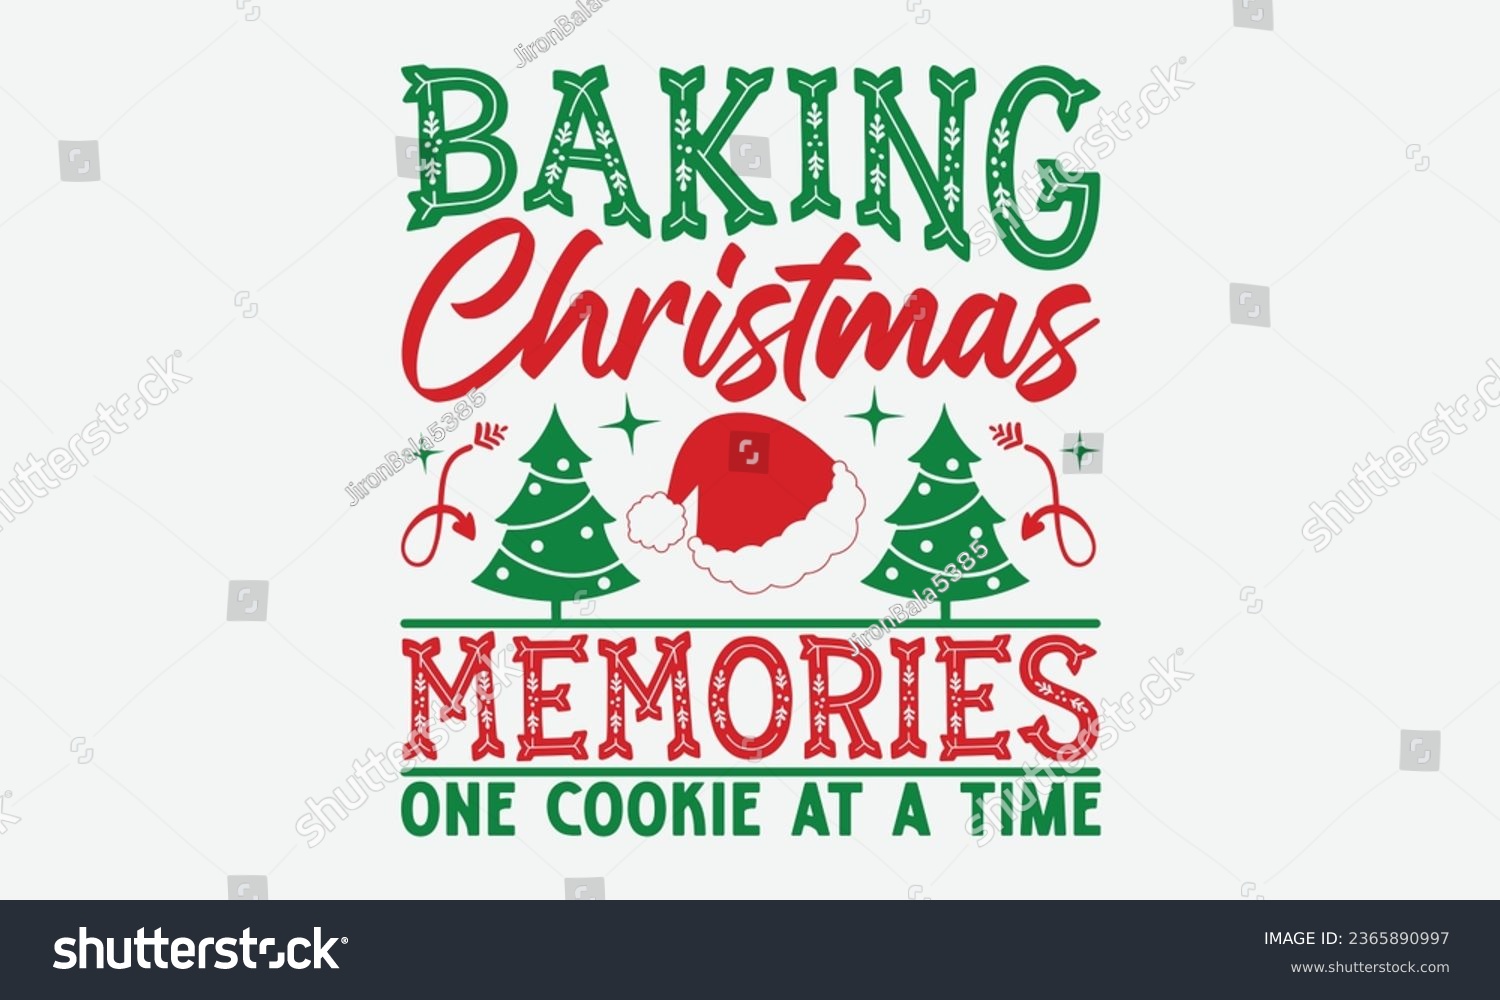 SVG of Baking Christmas Memories One Cookie At A Time - Christmas T-shirt Design,  Files for Cutting, Isolated on white background, Cut Files for poster, banner, prints on bags, Digital Download. svg